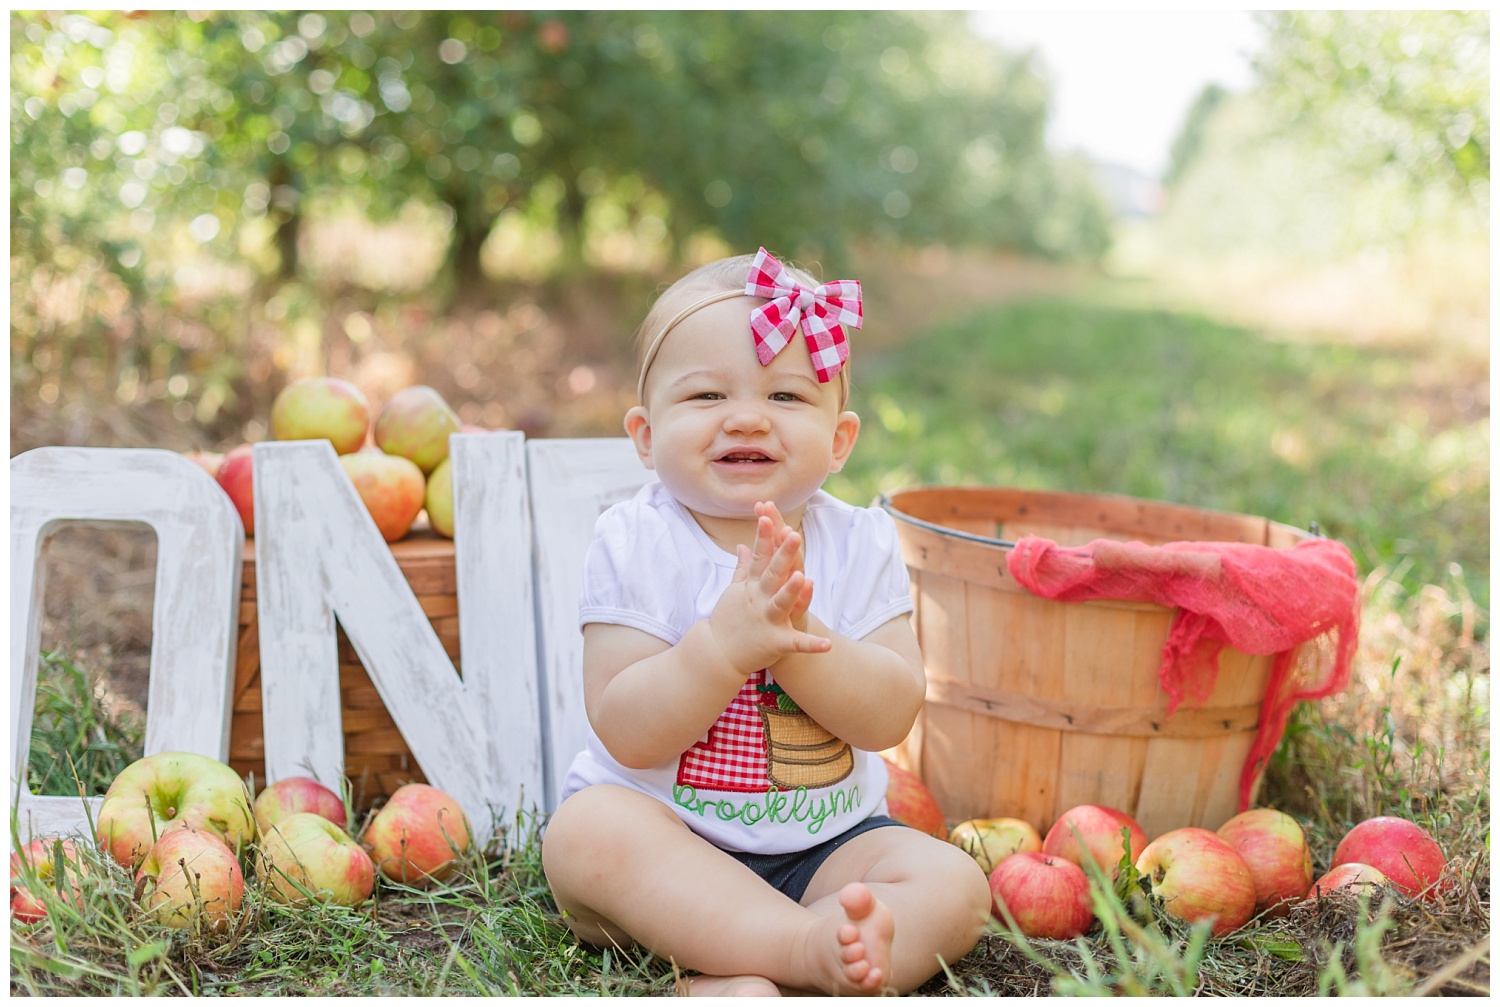 1st birthday cake smash session at apple orchard in Clyde, Ohio